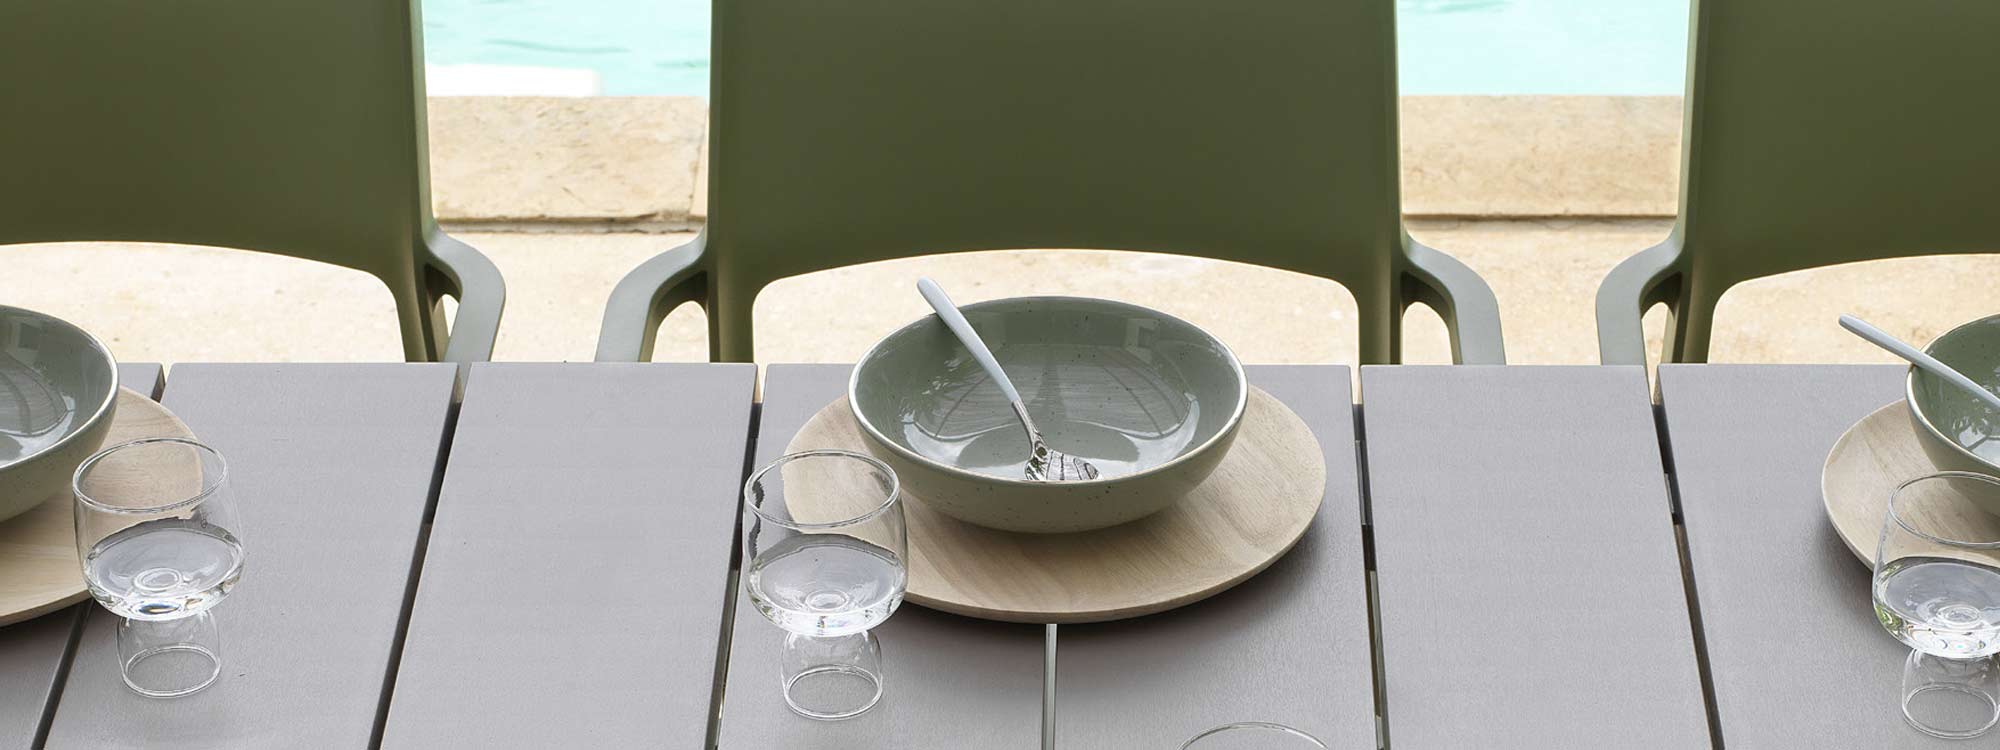 Trill Chairs & Rio EXTENDING Outdoor TABLE Is A MODERN Garden Dining Table In ALL-WEATHER Hospitality Furniture MATERIALS By Nardi Exterior Contract Furniture